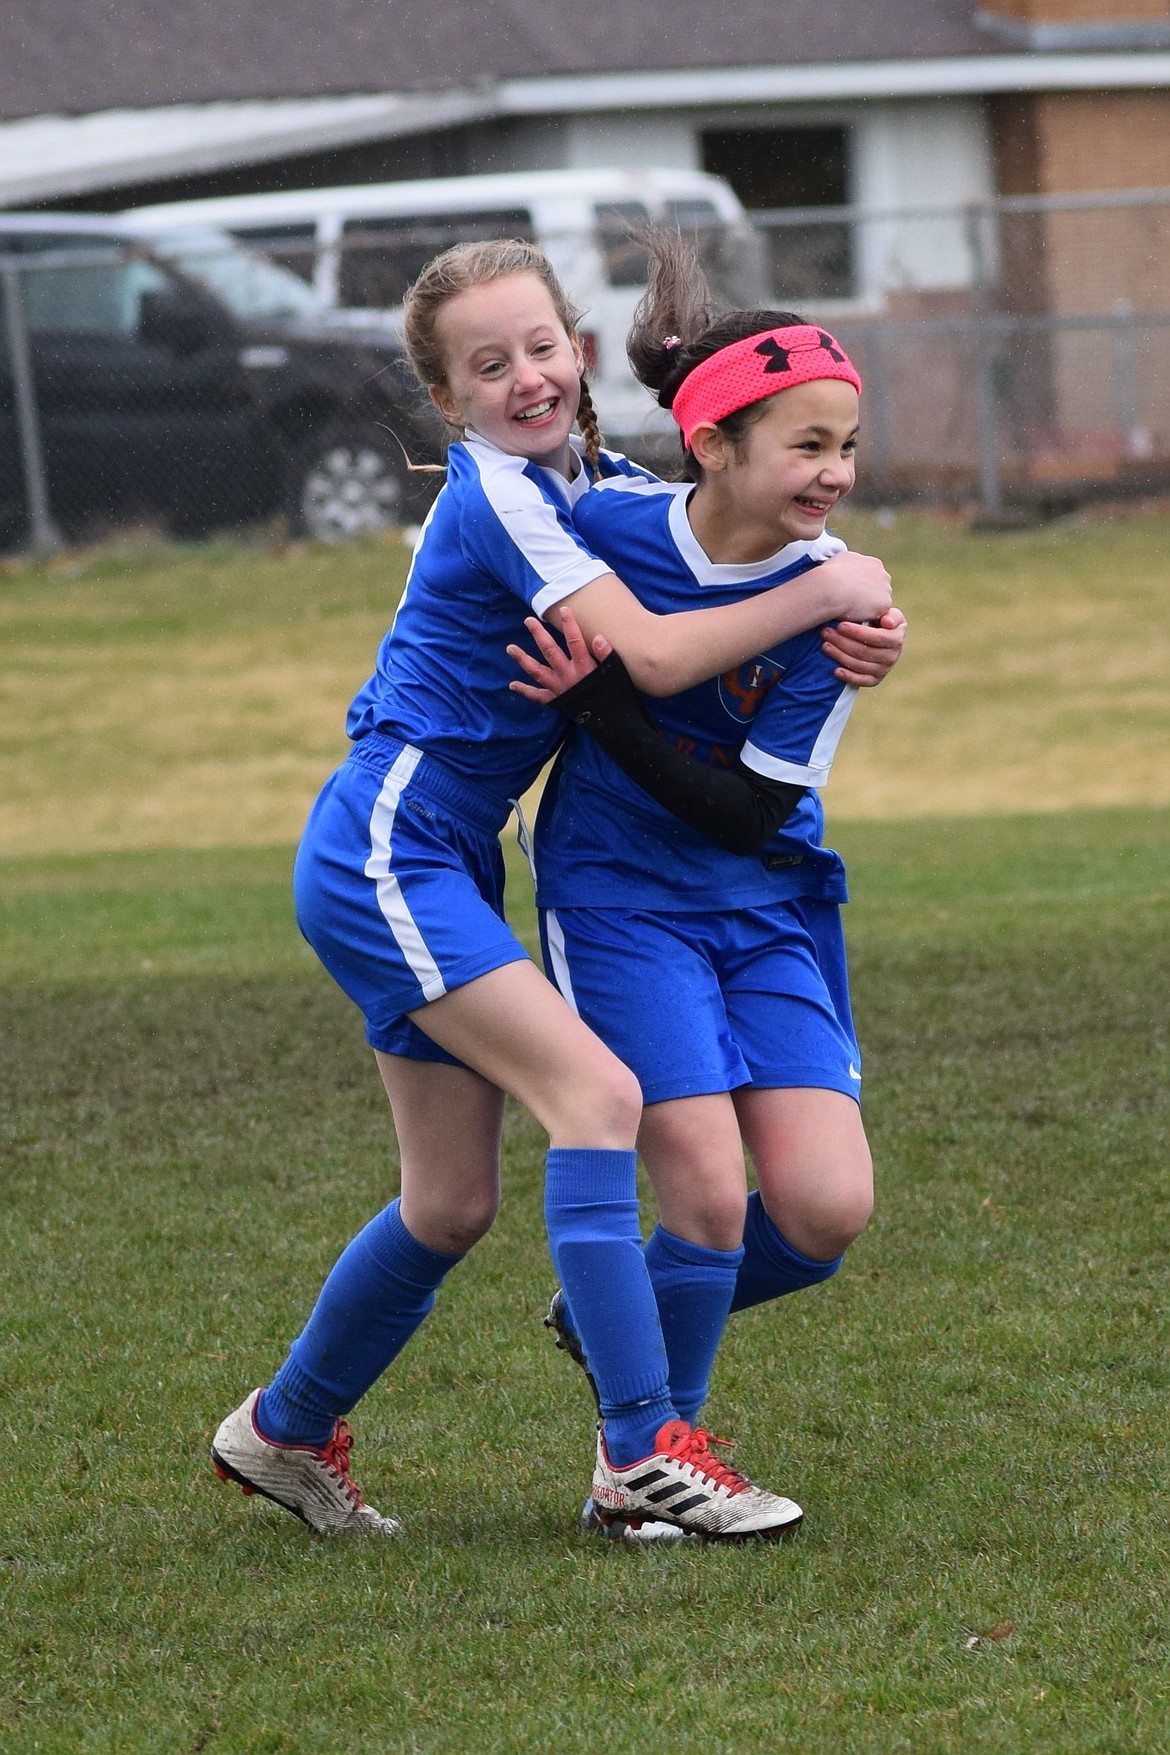 Lily Bole, left, celebrates with teammate Isabella Berzoza after Berzoza scores for the North Idaho Inferno FC Hartzell girls &#146;07 team in a March 25 win over the Spokane Foxes Pumas FC 07 Ostby-Marsh.
Courtesy photo